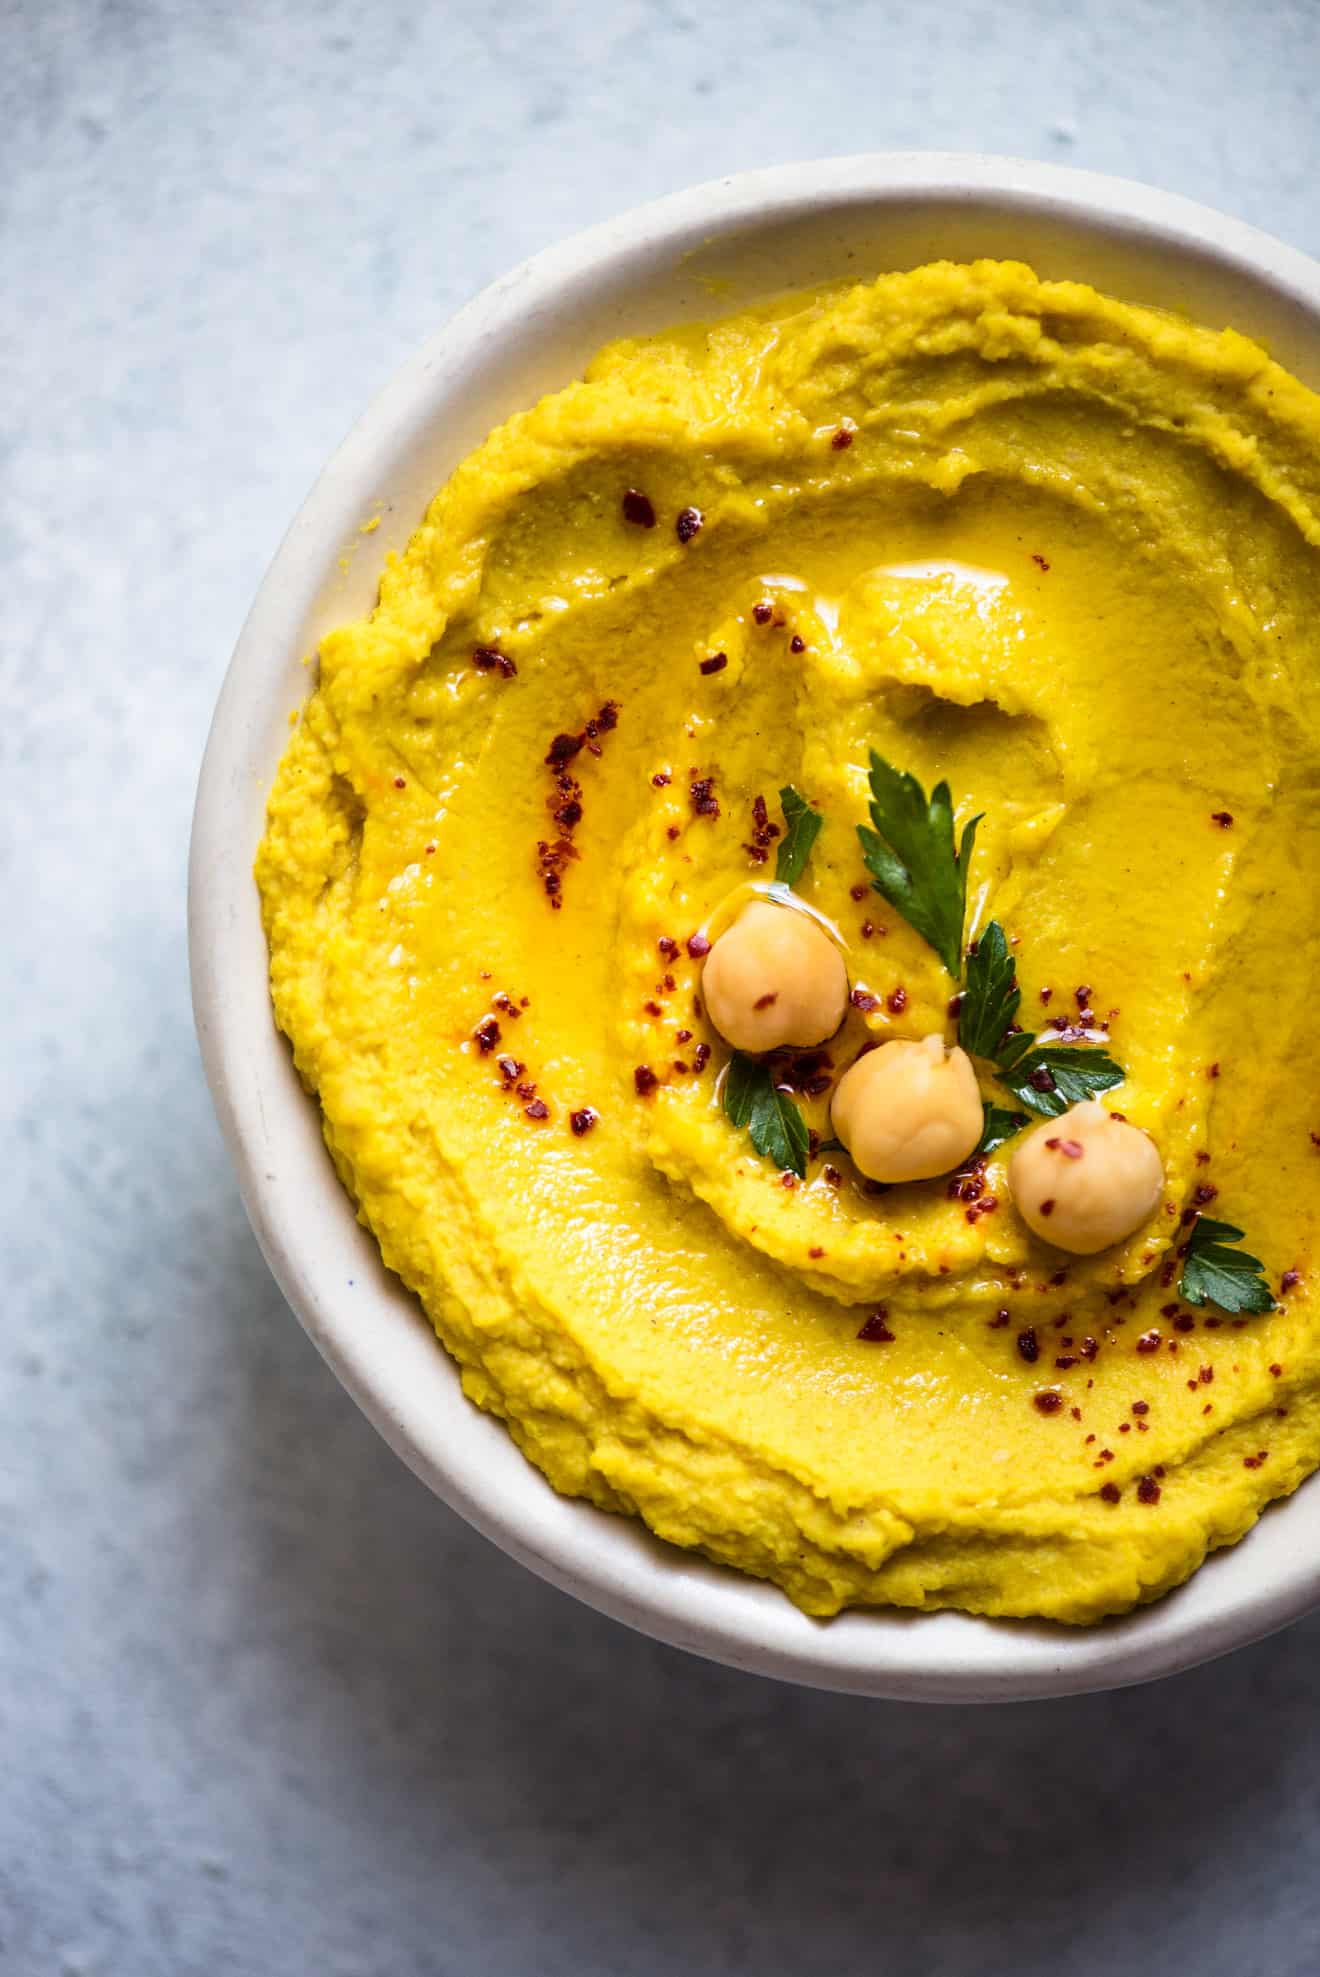 GOLDEN Turmeric Hummus - an easy and healthy vegan hummus that is great as a snack!